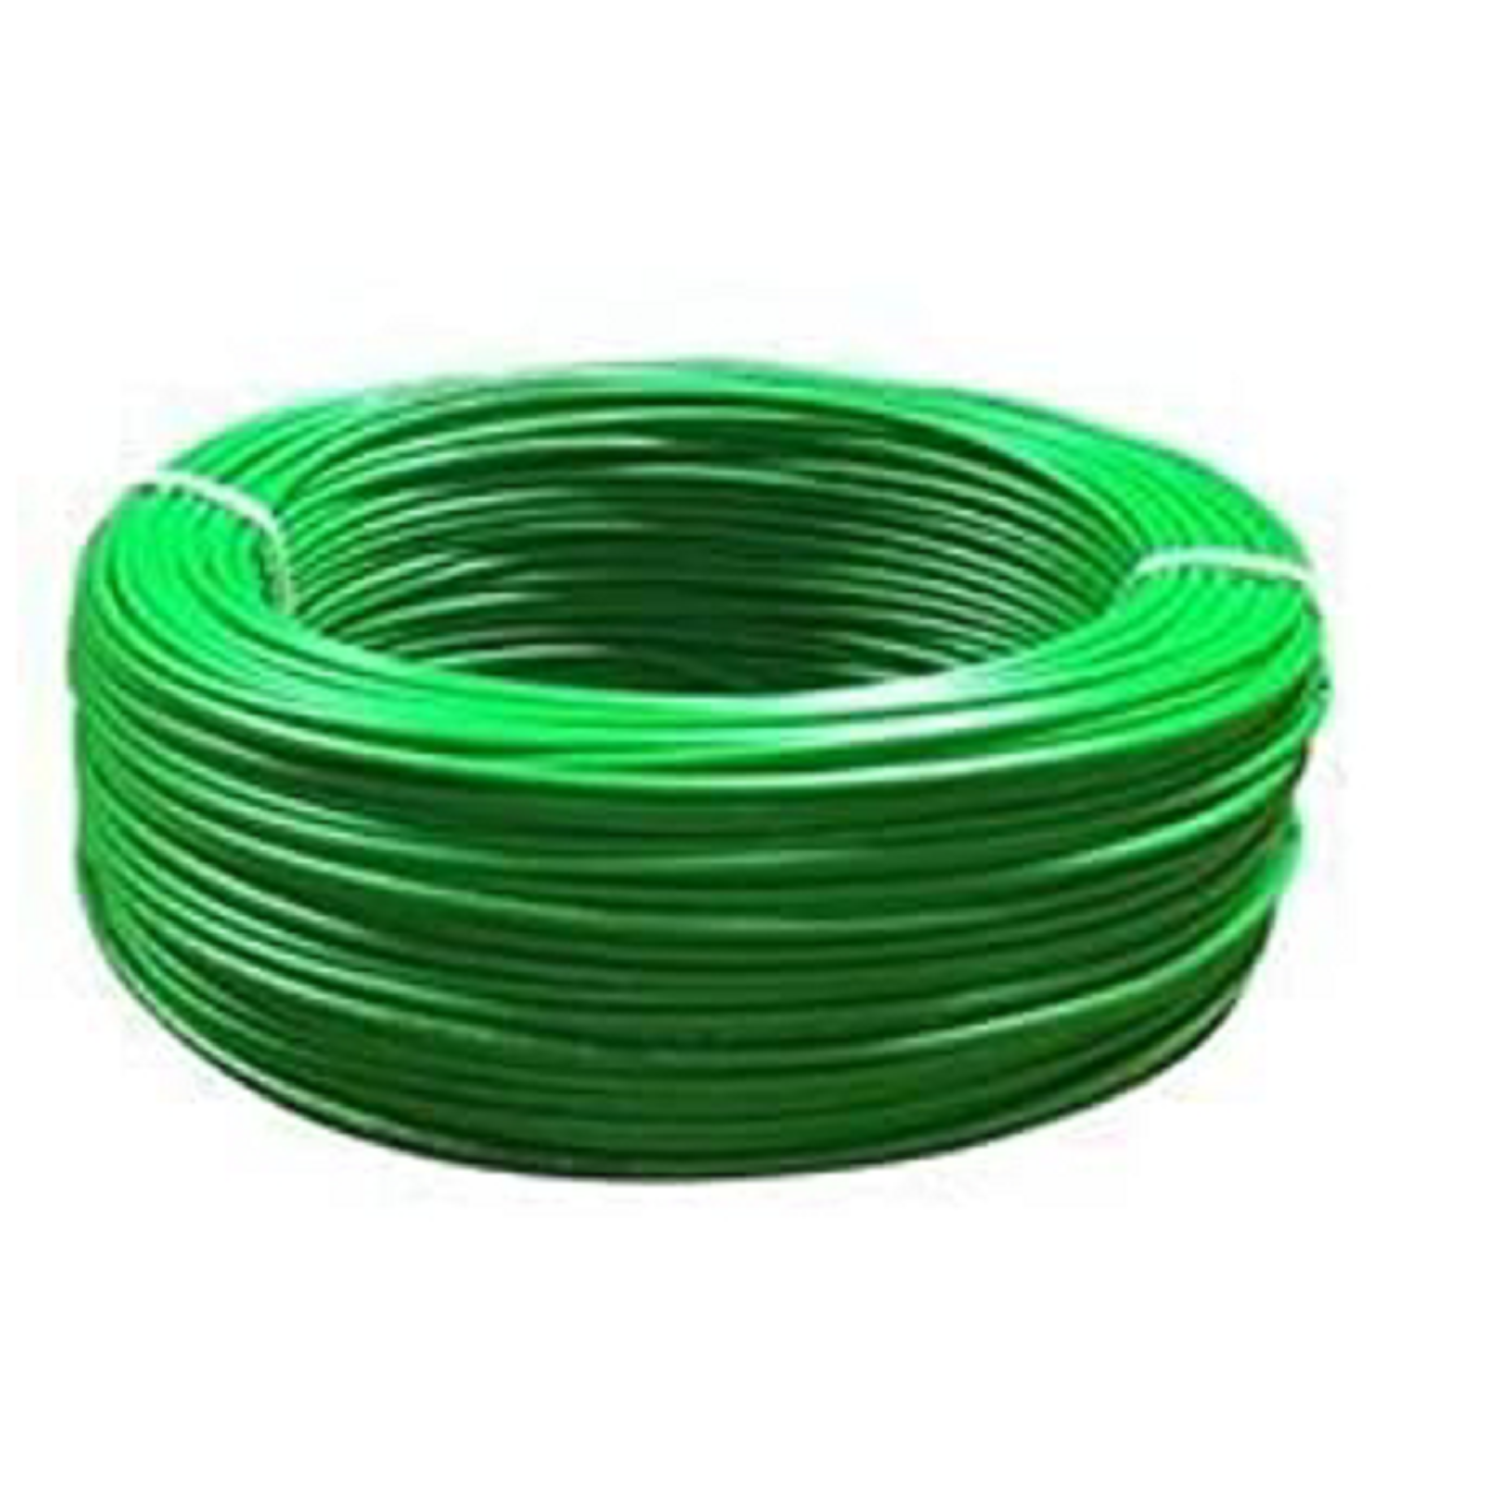 Polycab FR-LS 1 SQ-MM, (300 Meters) PVC Insulated Copper Wire Single Core (Green)